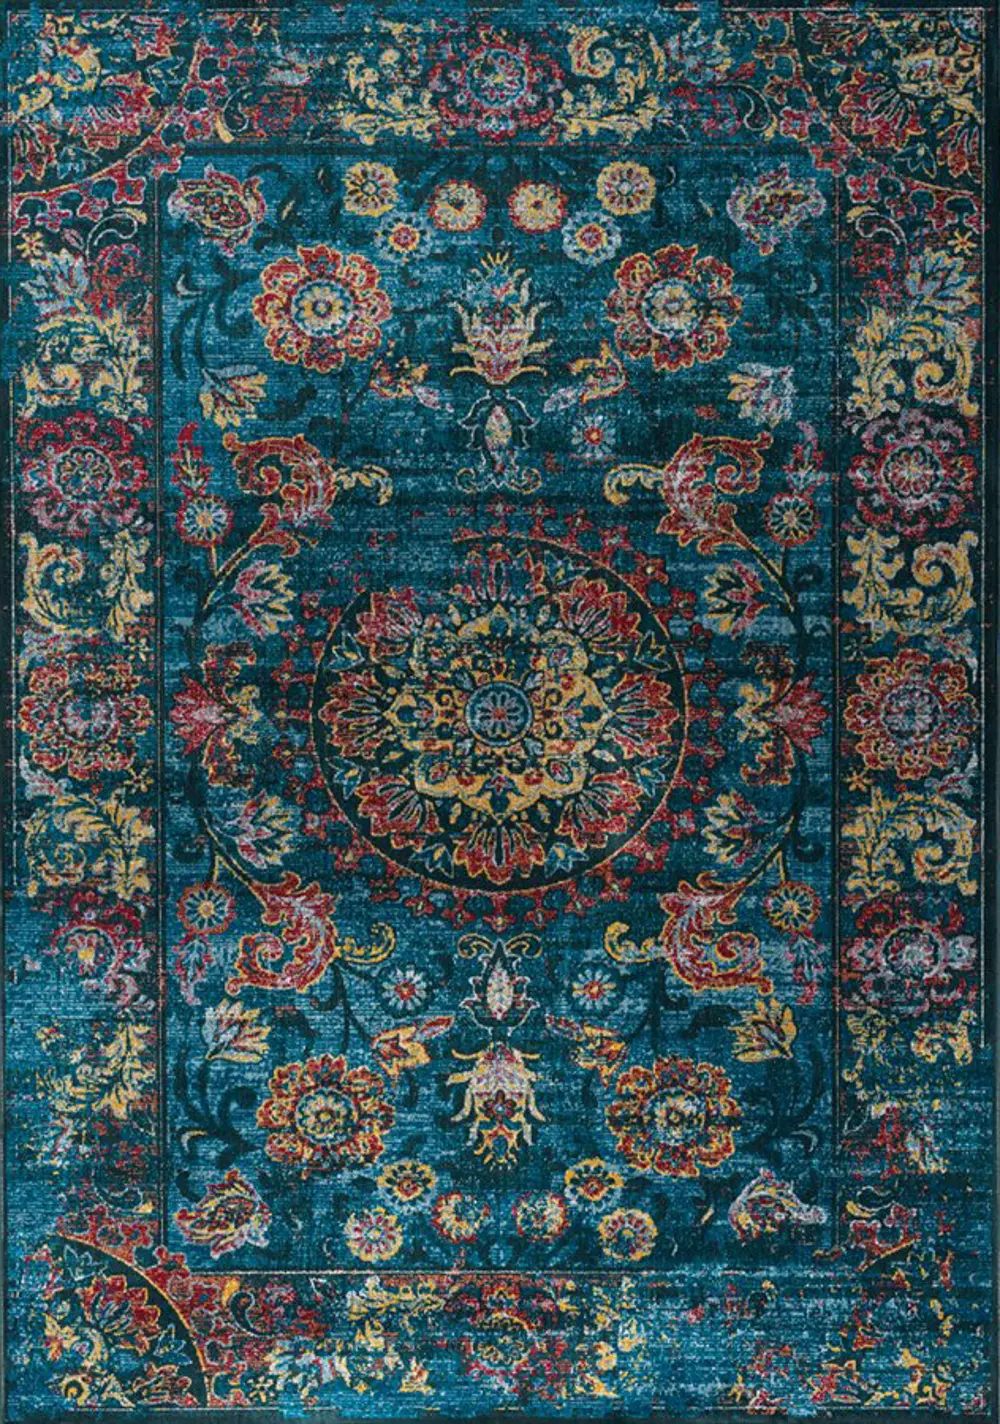 Antika 7 x 10 Vintage Teal Blue and Red Area Rug-1